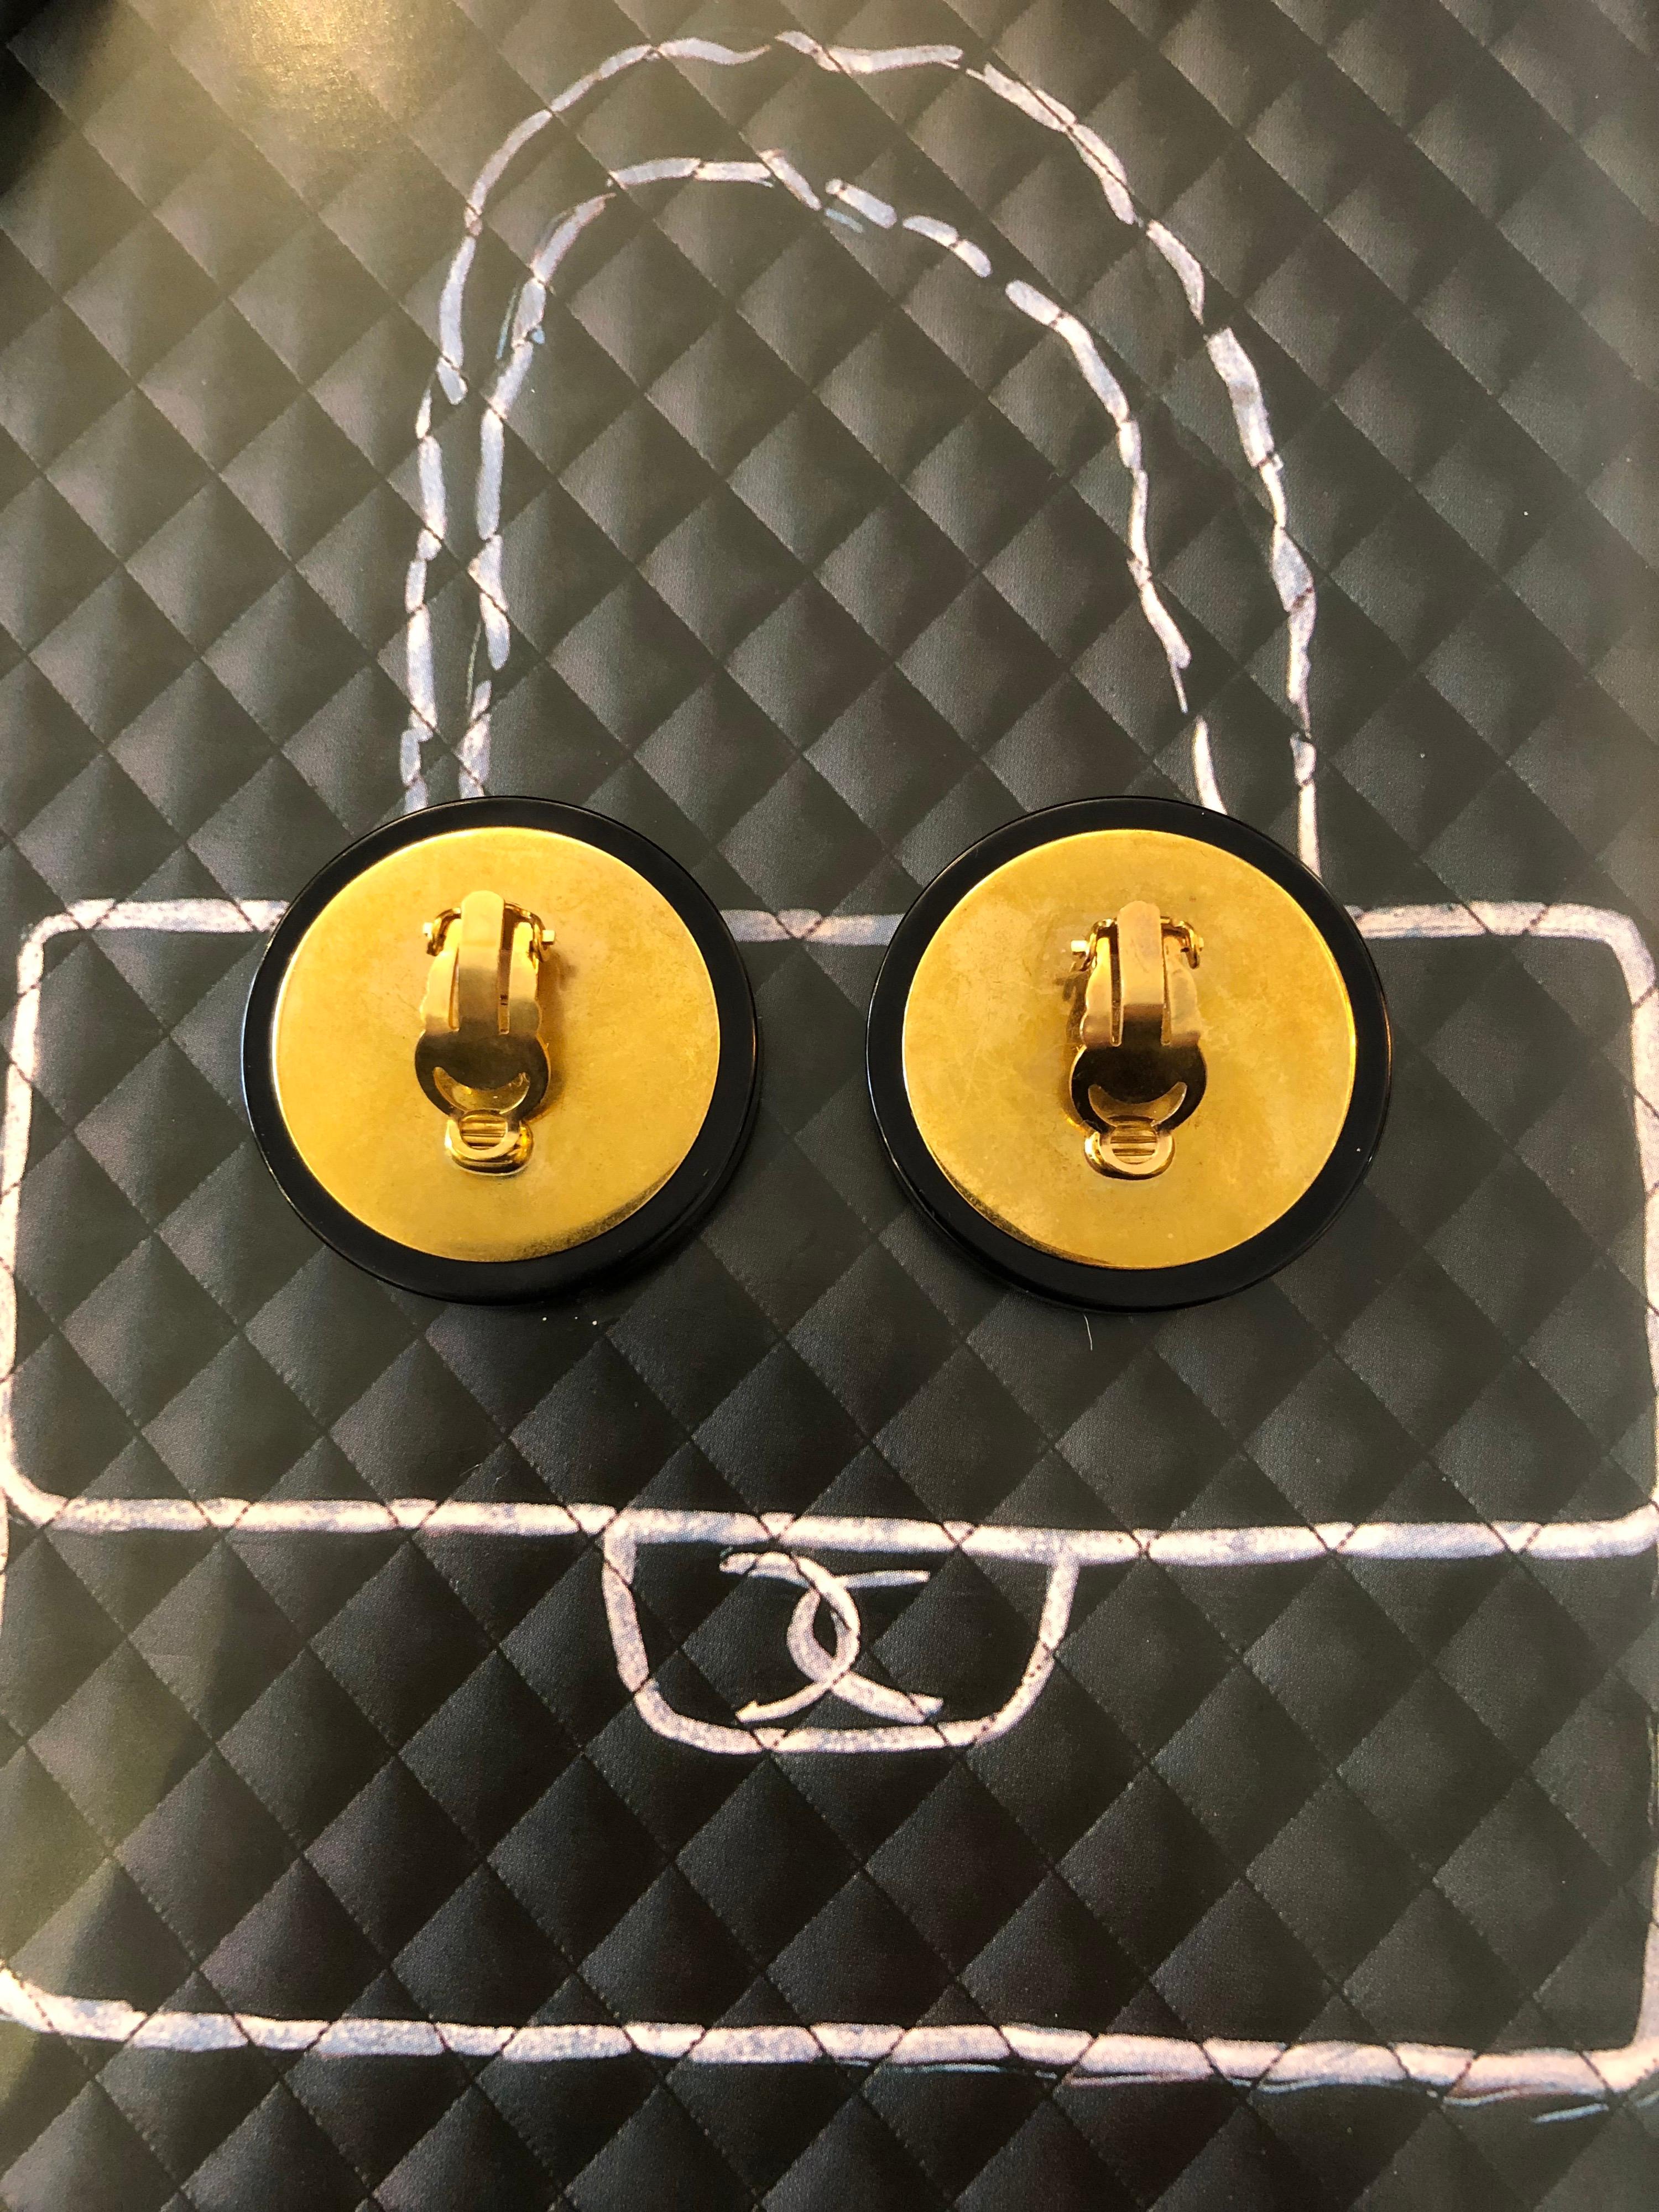 1990s Chanel button earring in black resin featuring a textured gold toned CC. Jumbo Sized. Stamped 28 made in France. Measures 4cm in diameter. Come with box.

Condition - Minor signs of wear. 